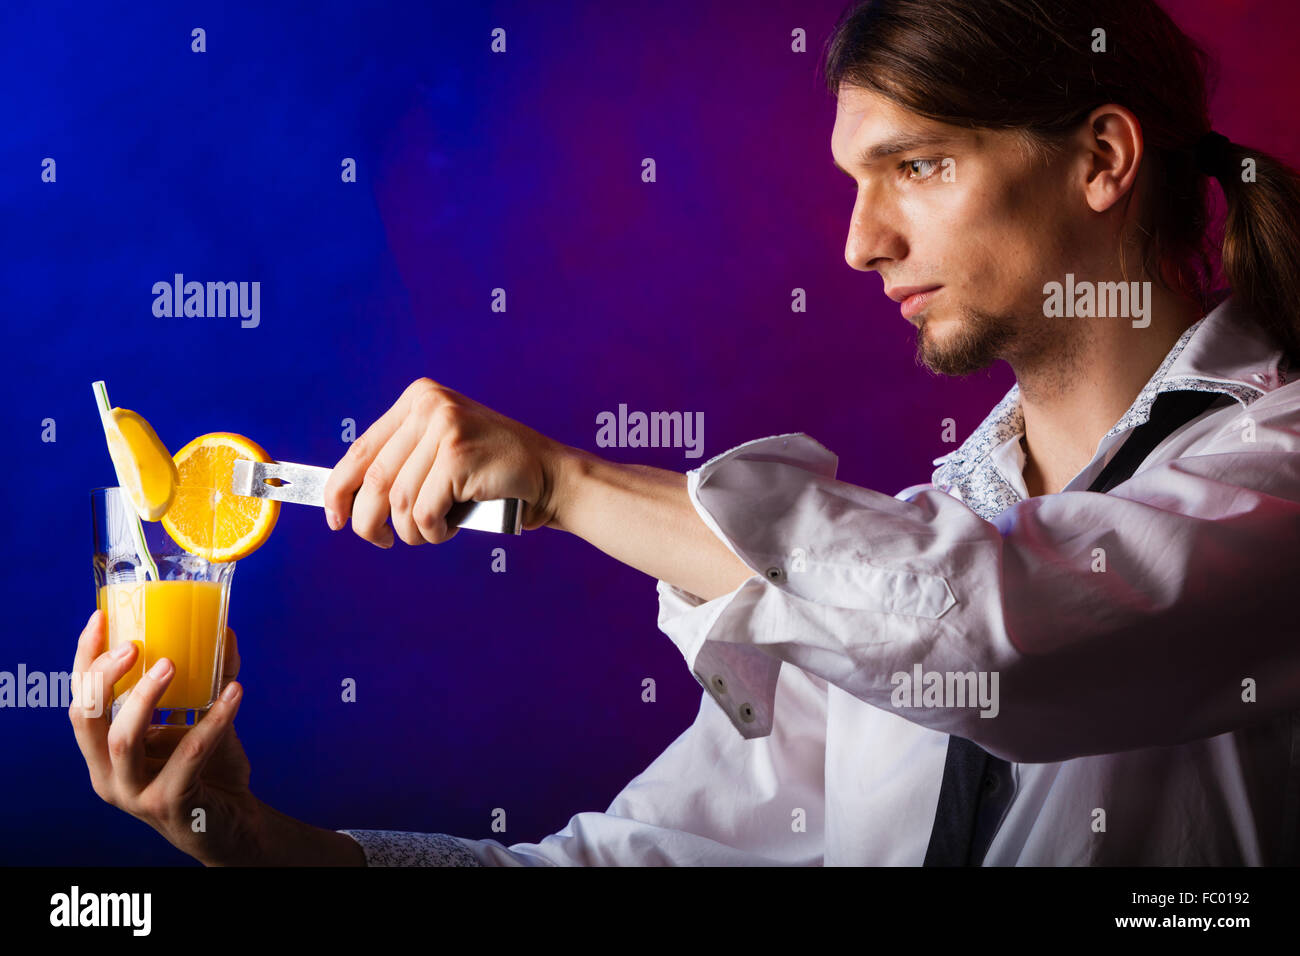 Young man bartender preparing alcohol cocktail drink Stock Photo